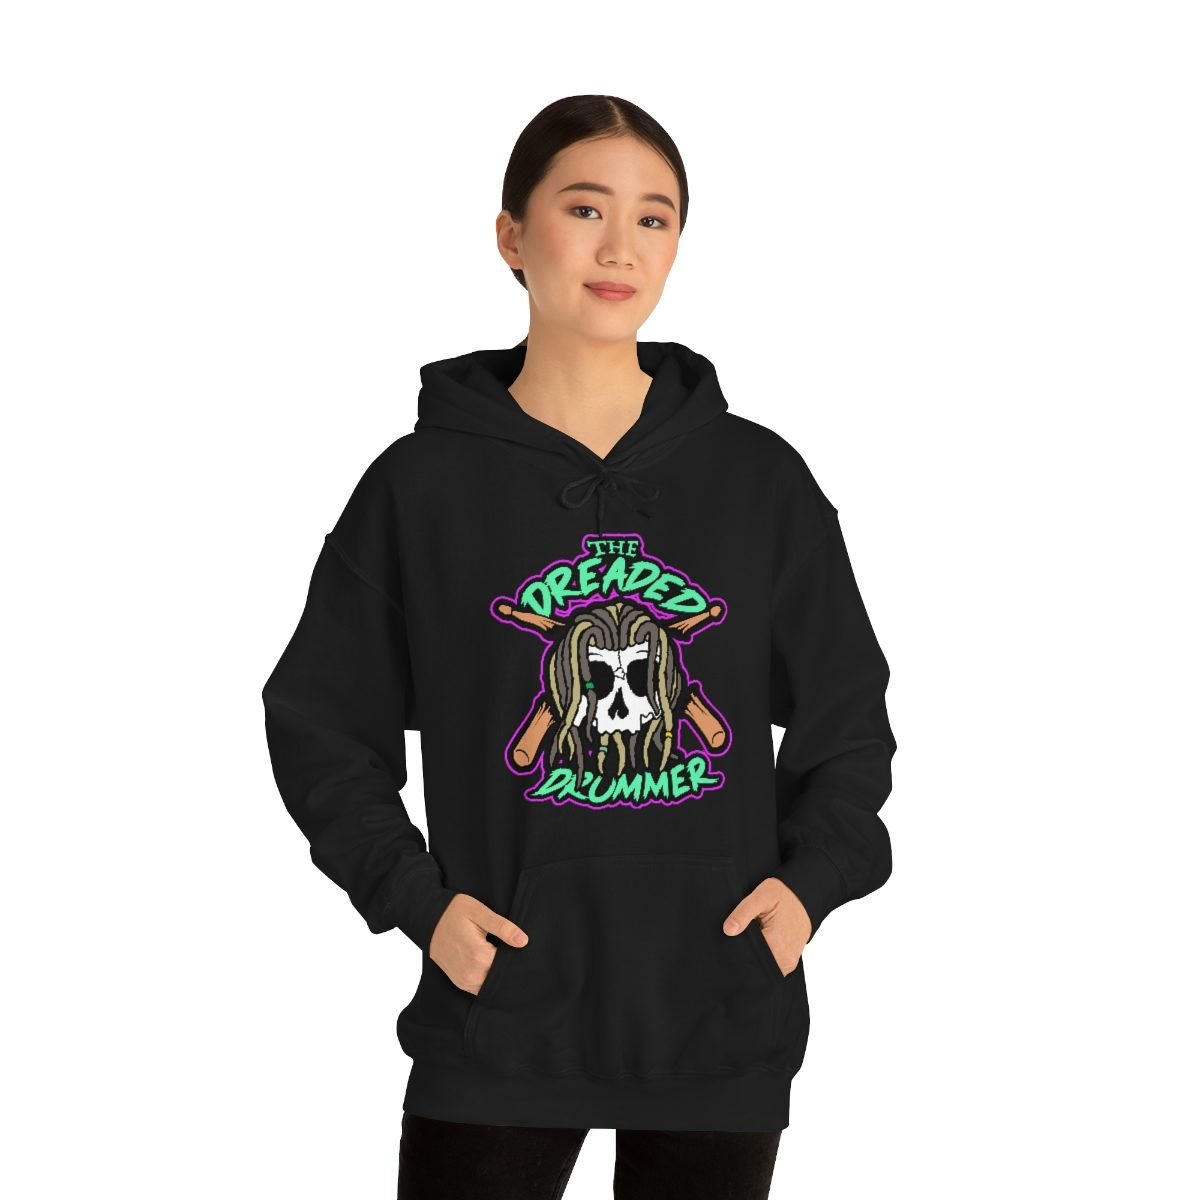 The Dreaded Drummer Green and Purple Version Pullover Hooded Sweatshirt